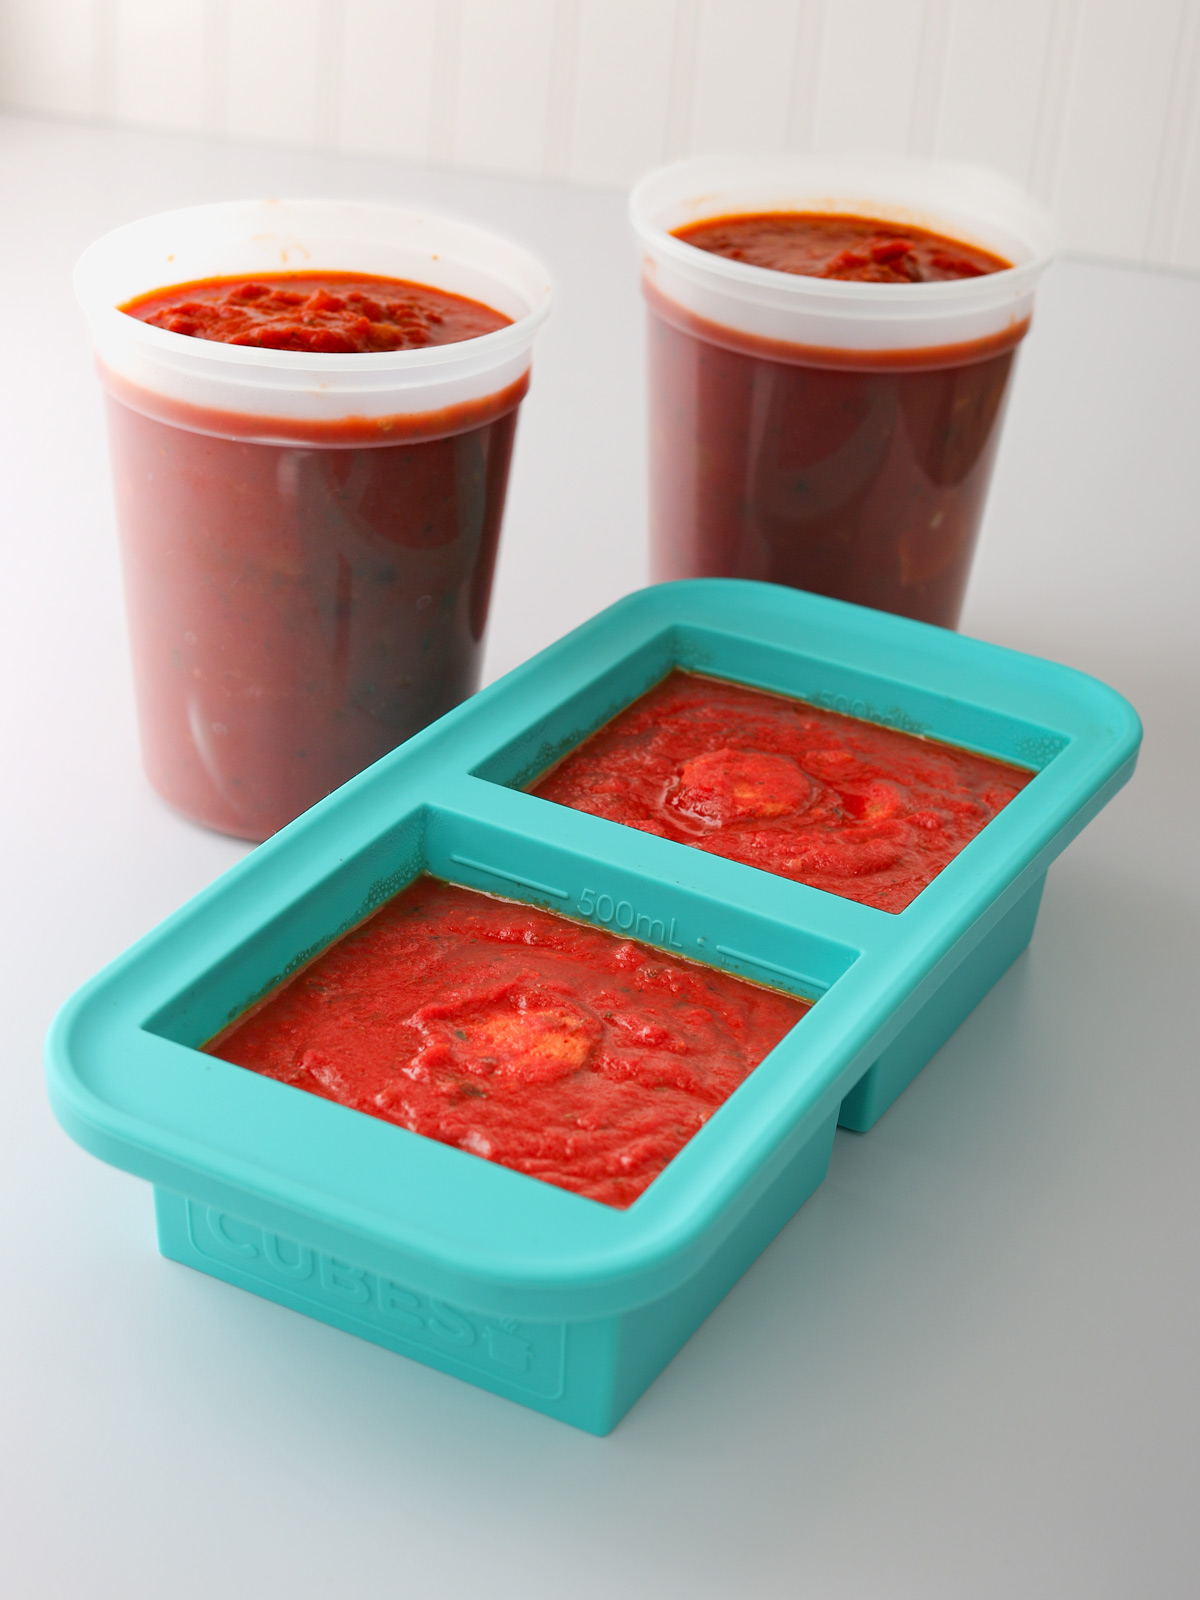 the sauce ready to freeze in containers.